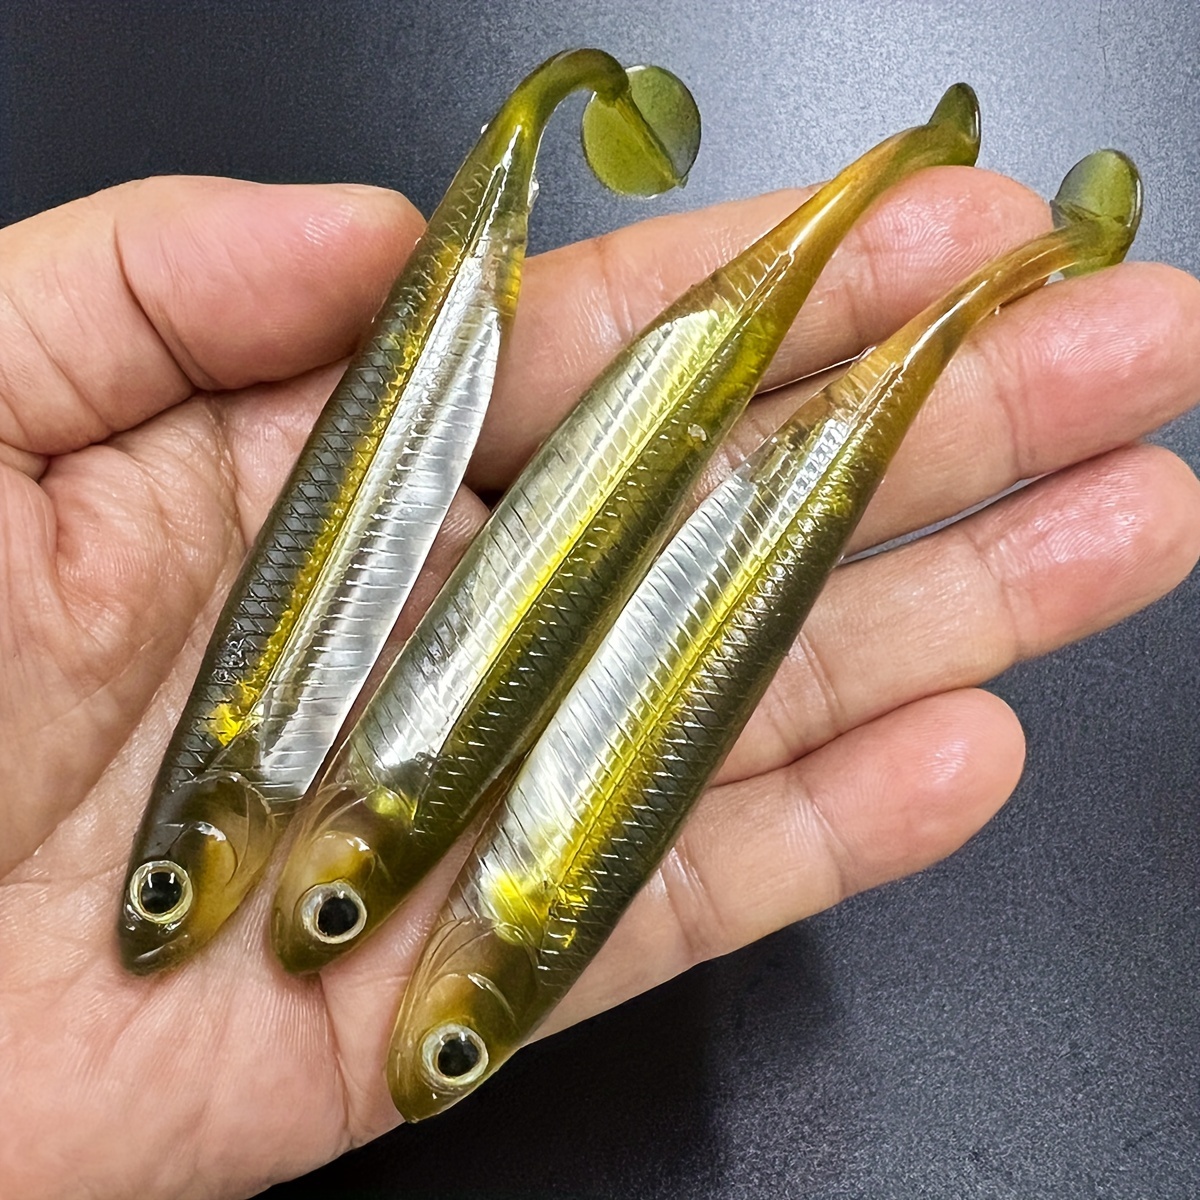 9pcs/box * Frog Shaped Fishing Lures - Soft Floating Crankbait for Bass,  Trout, and Salmon - Gift Packaging Included